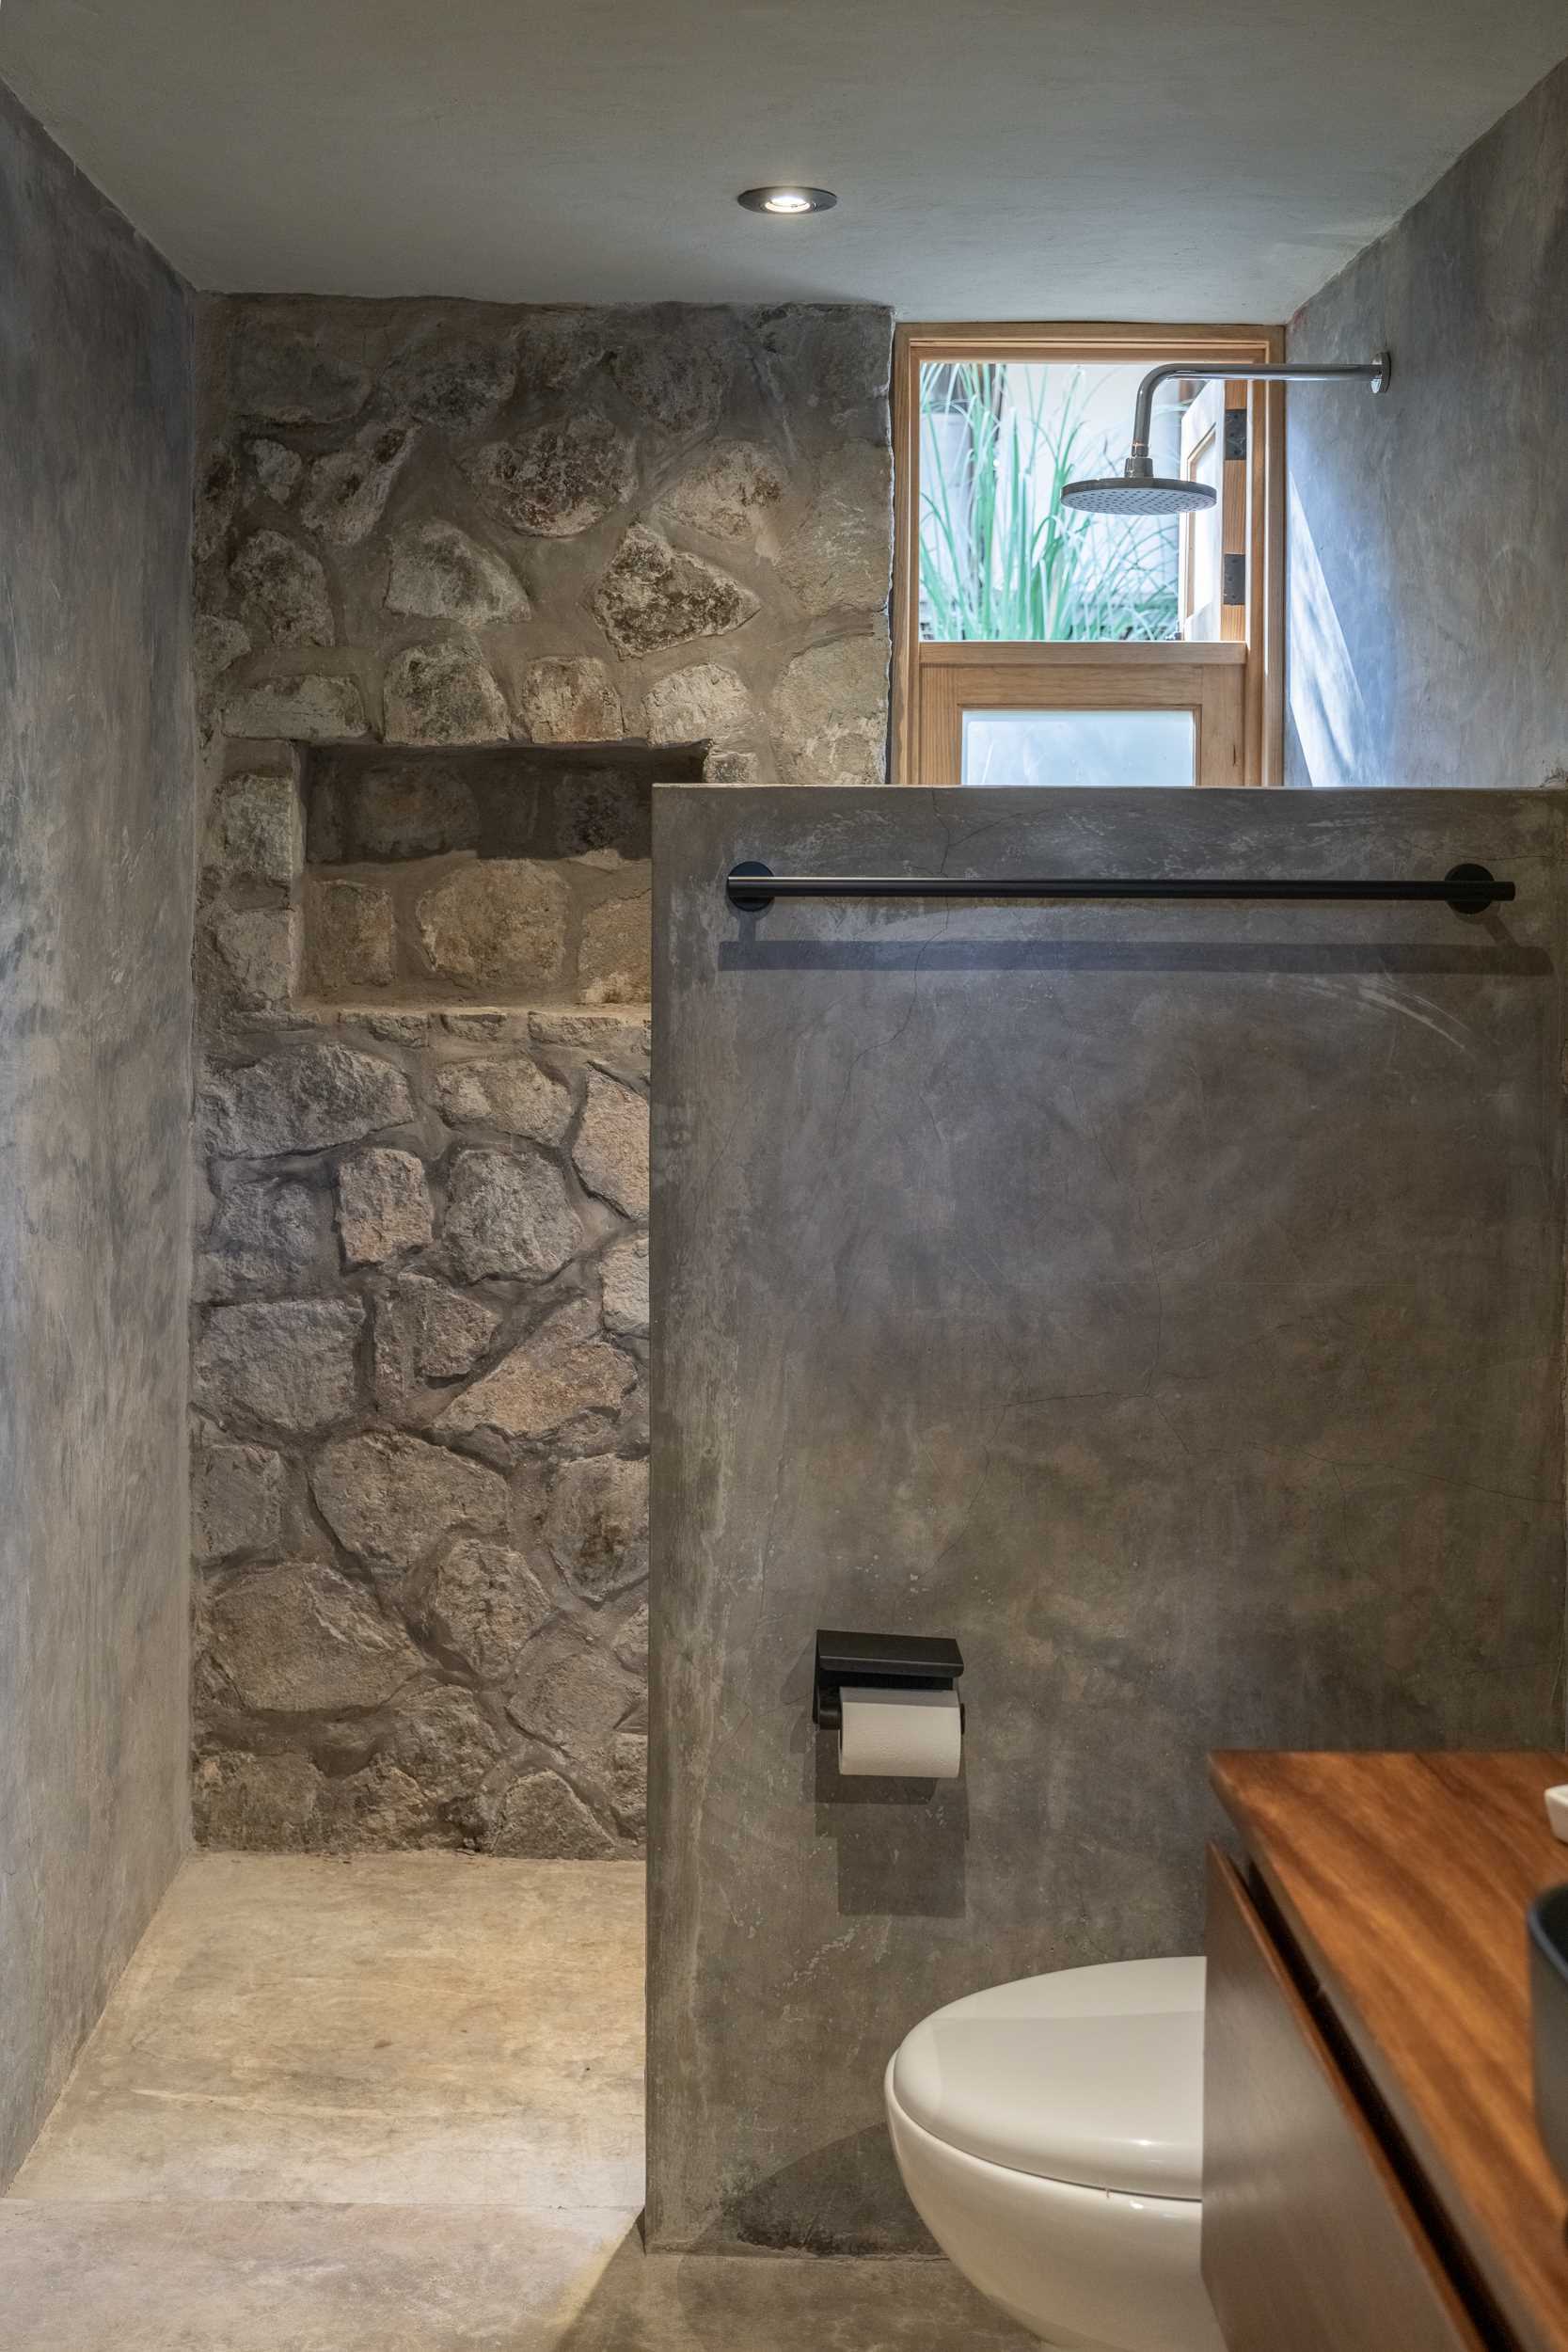 A modern stone and wood bathroom that includes a partial wall that separates the shower from the rest of the space.